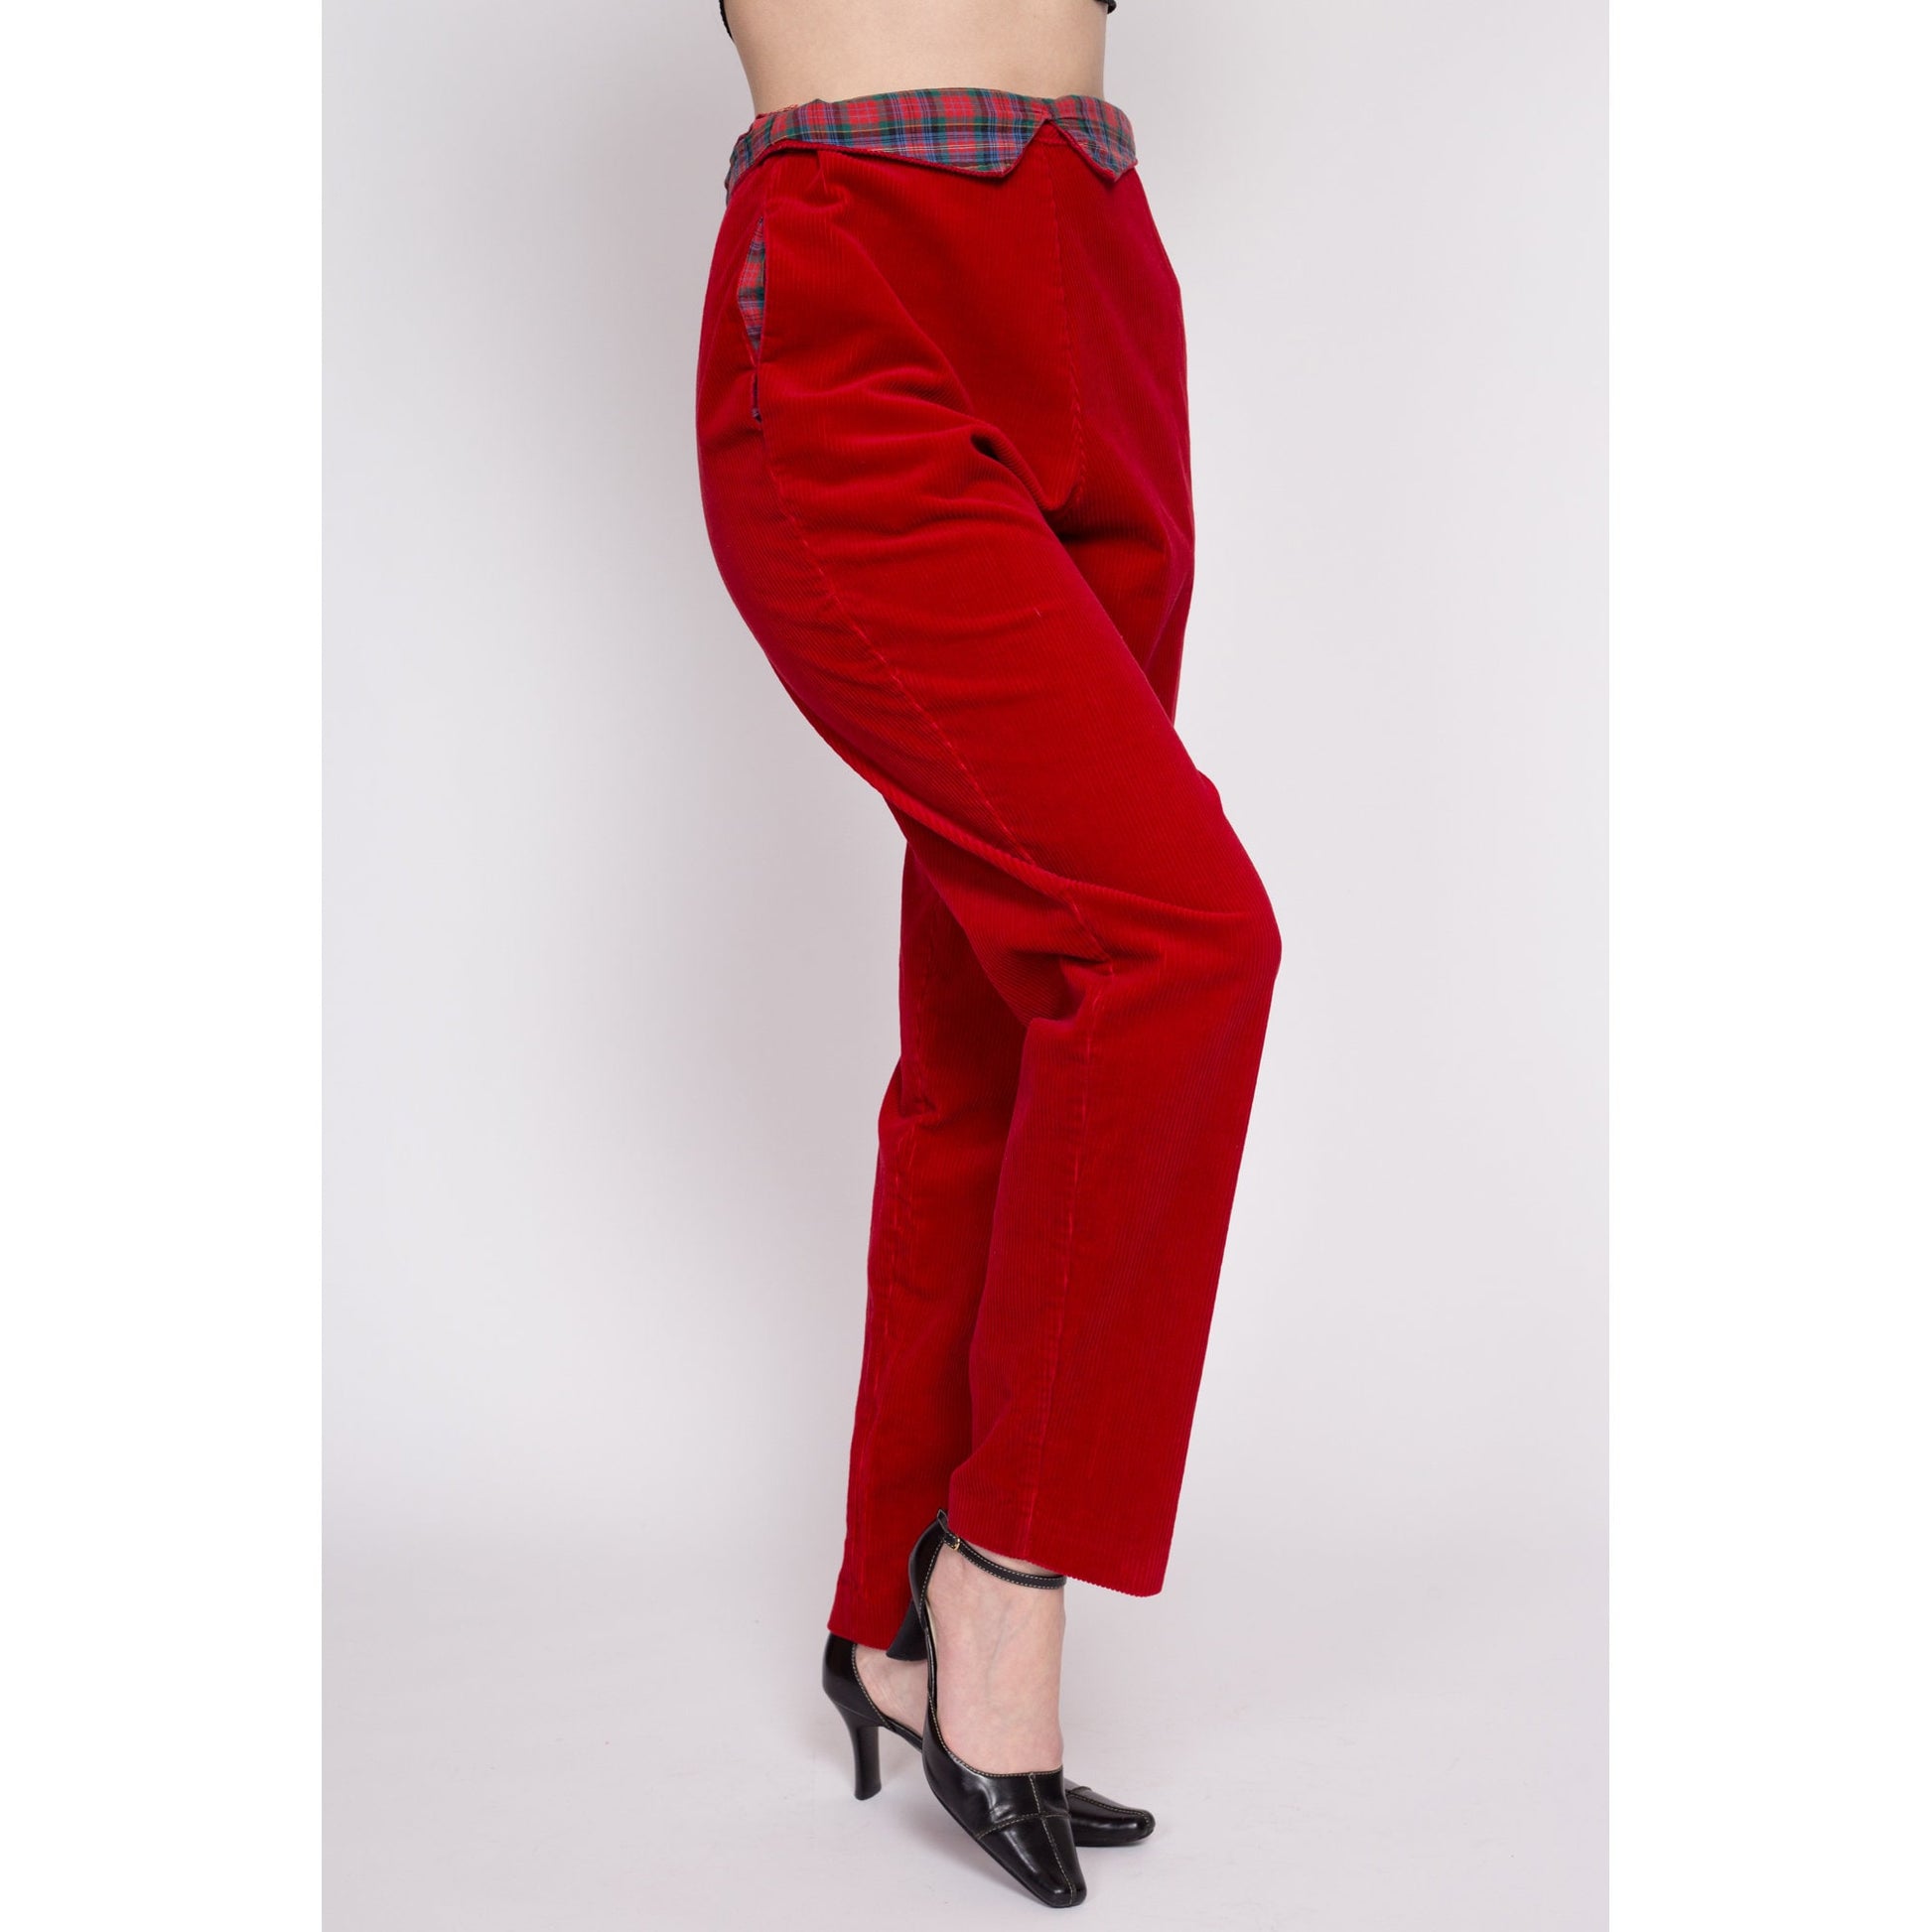 80s Red Corduroy Plaid Trim Pants - Medium | Vintage High Waisted Fold Over Paperbag Tapered Leg Retro Trousers